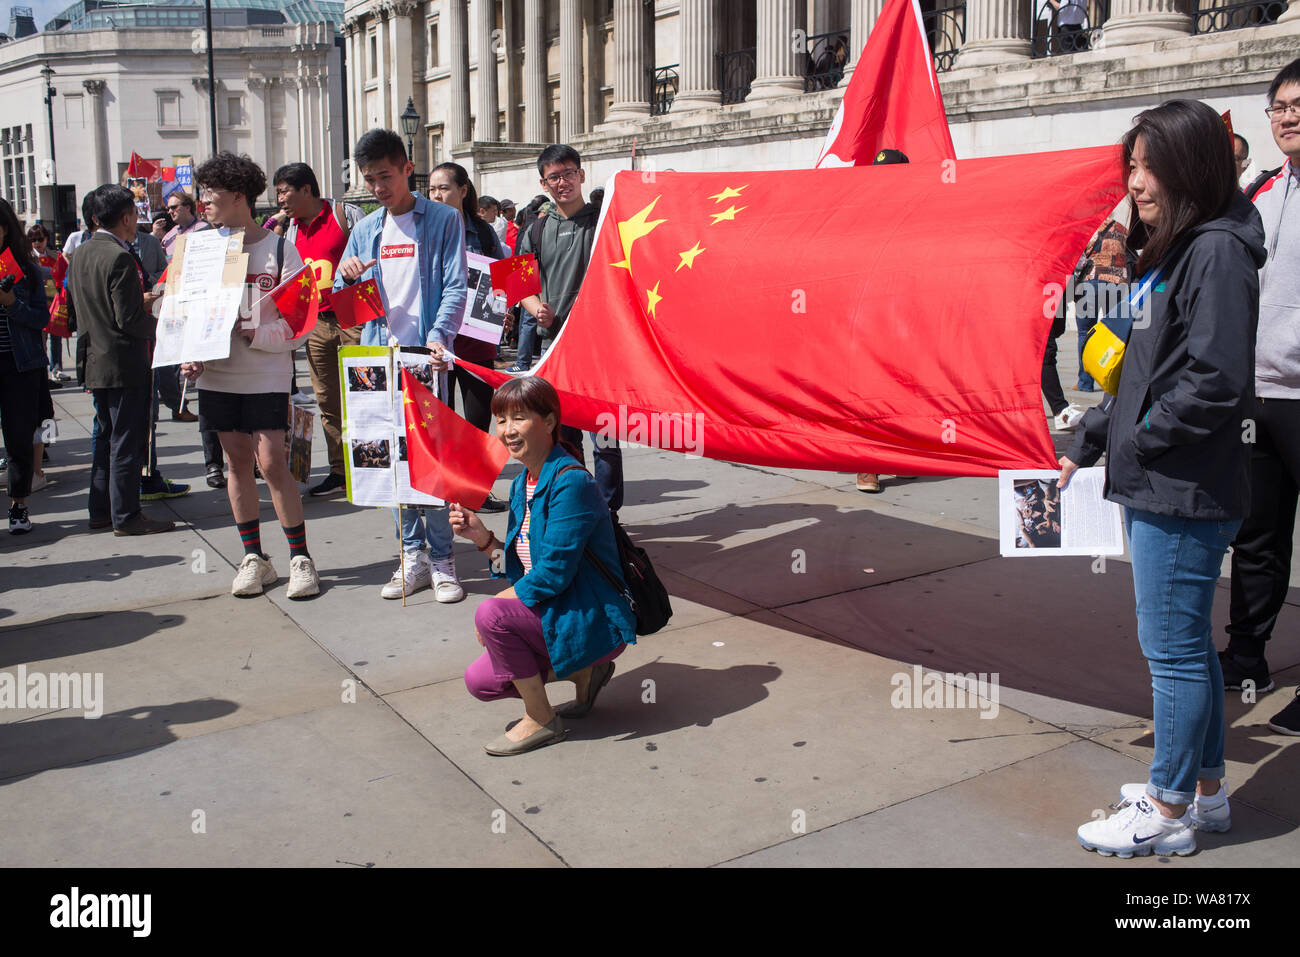 Pro-China protesters and Beijing supporters set up a protest in Trafalgar Square in central London, supporting police and condemning violence over the ongoing protests in Hong Kong. Stock Photo